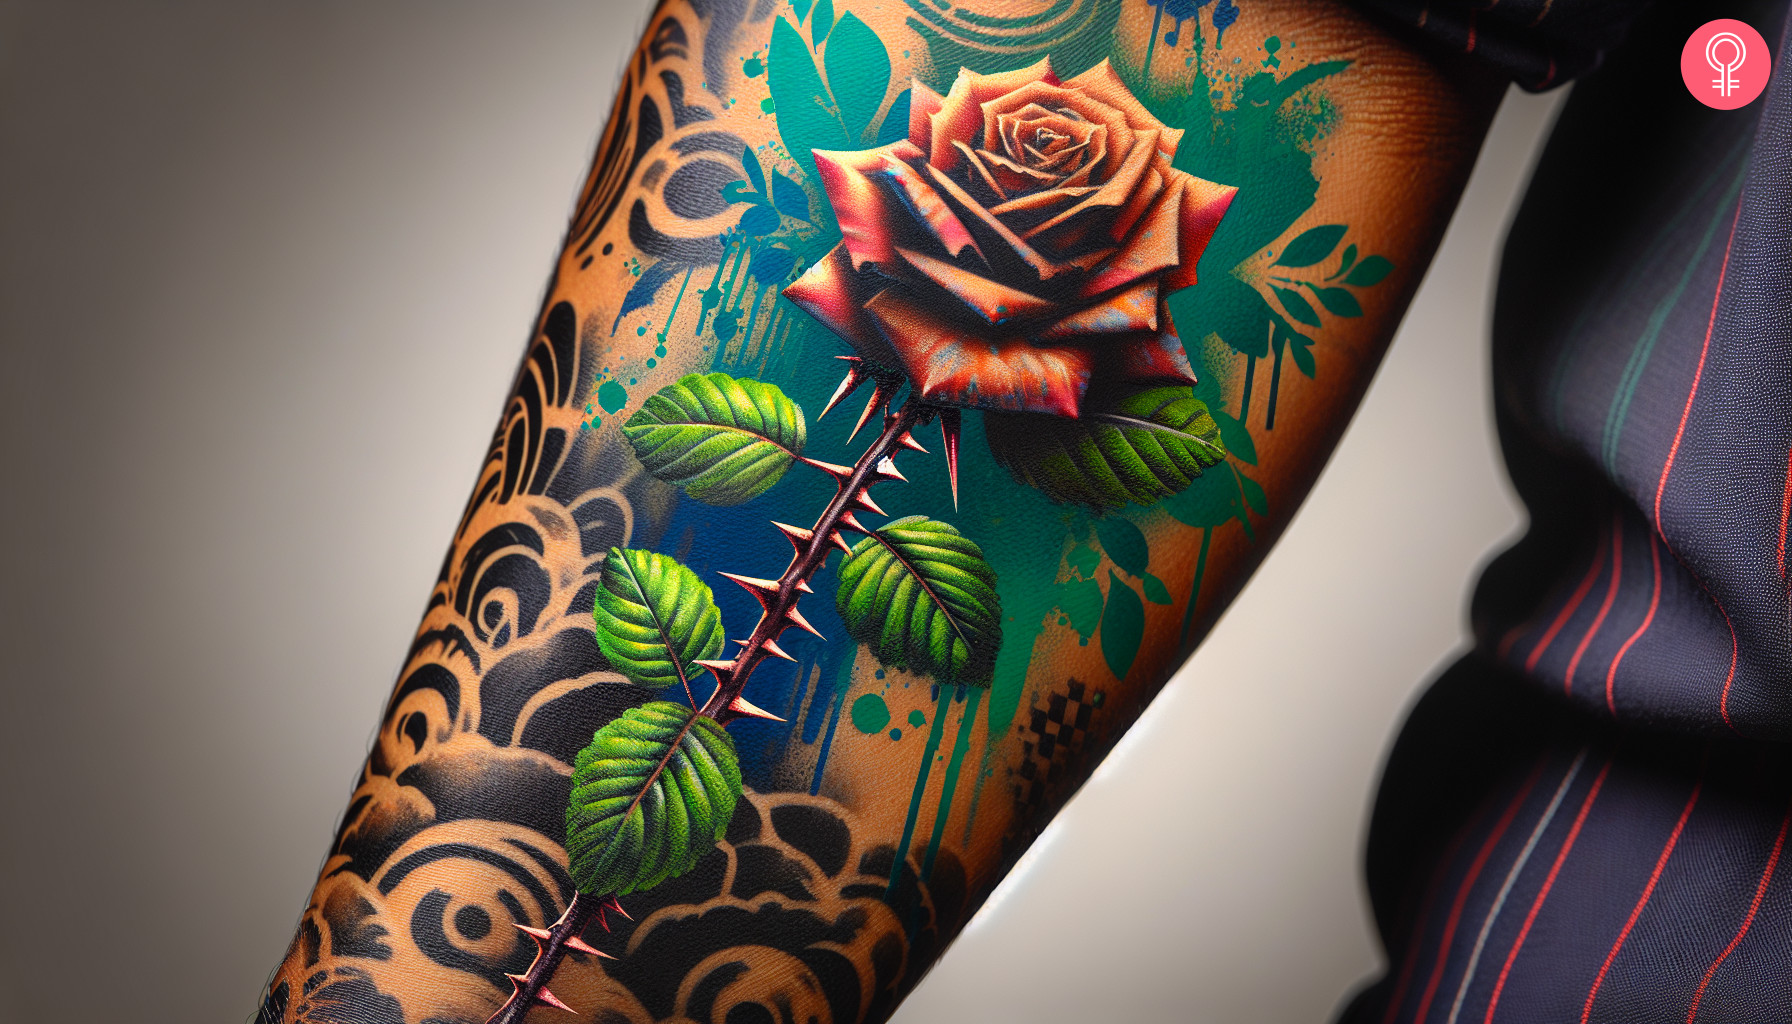 A graffiti tattoo on a woman’s forearm featuring a rose stem